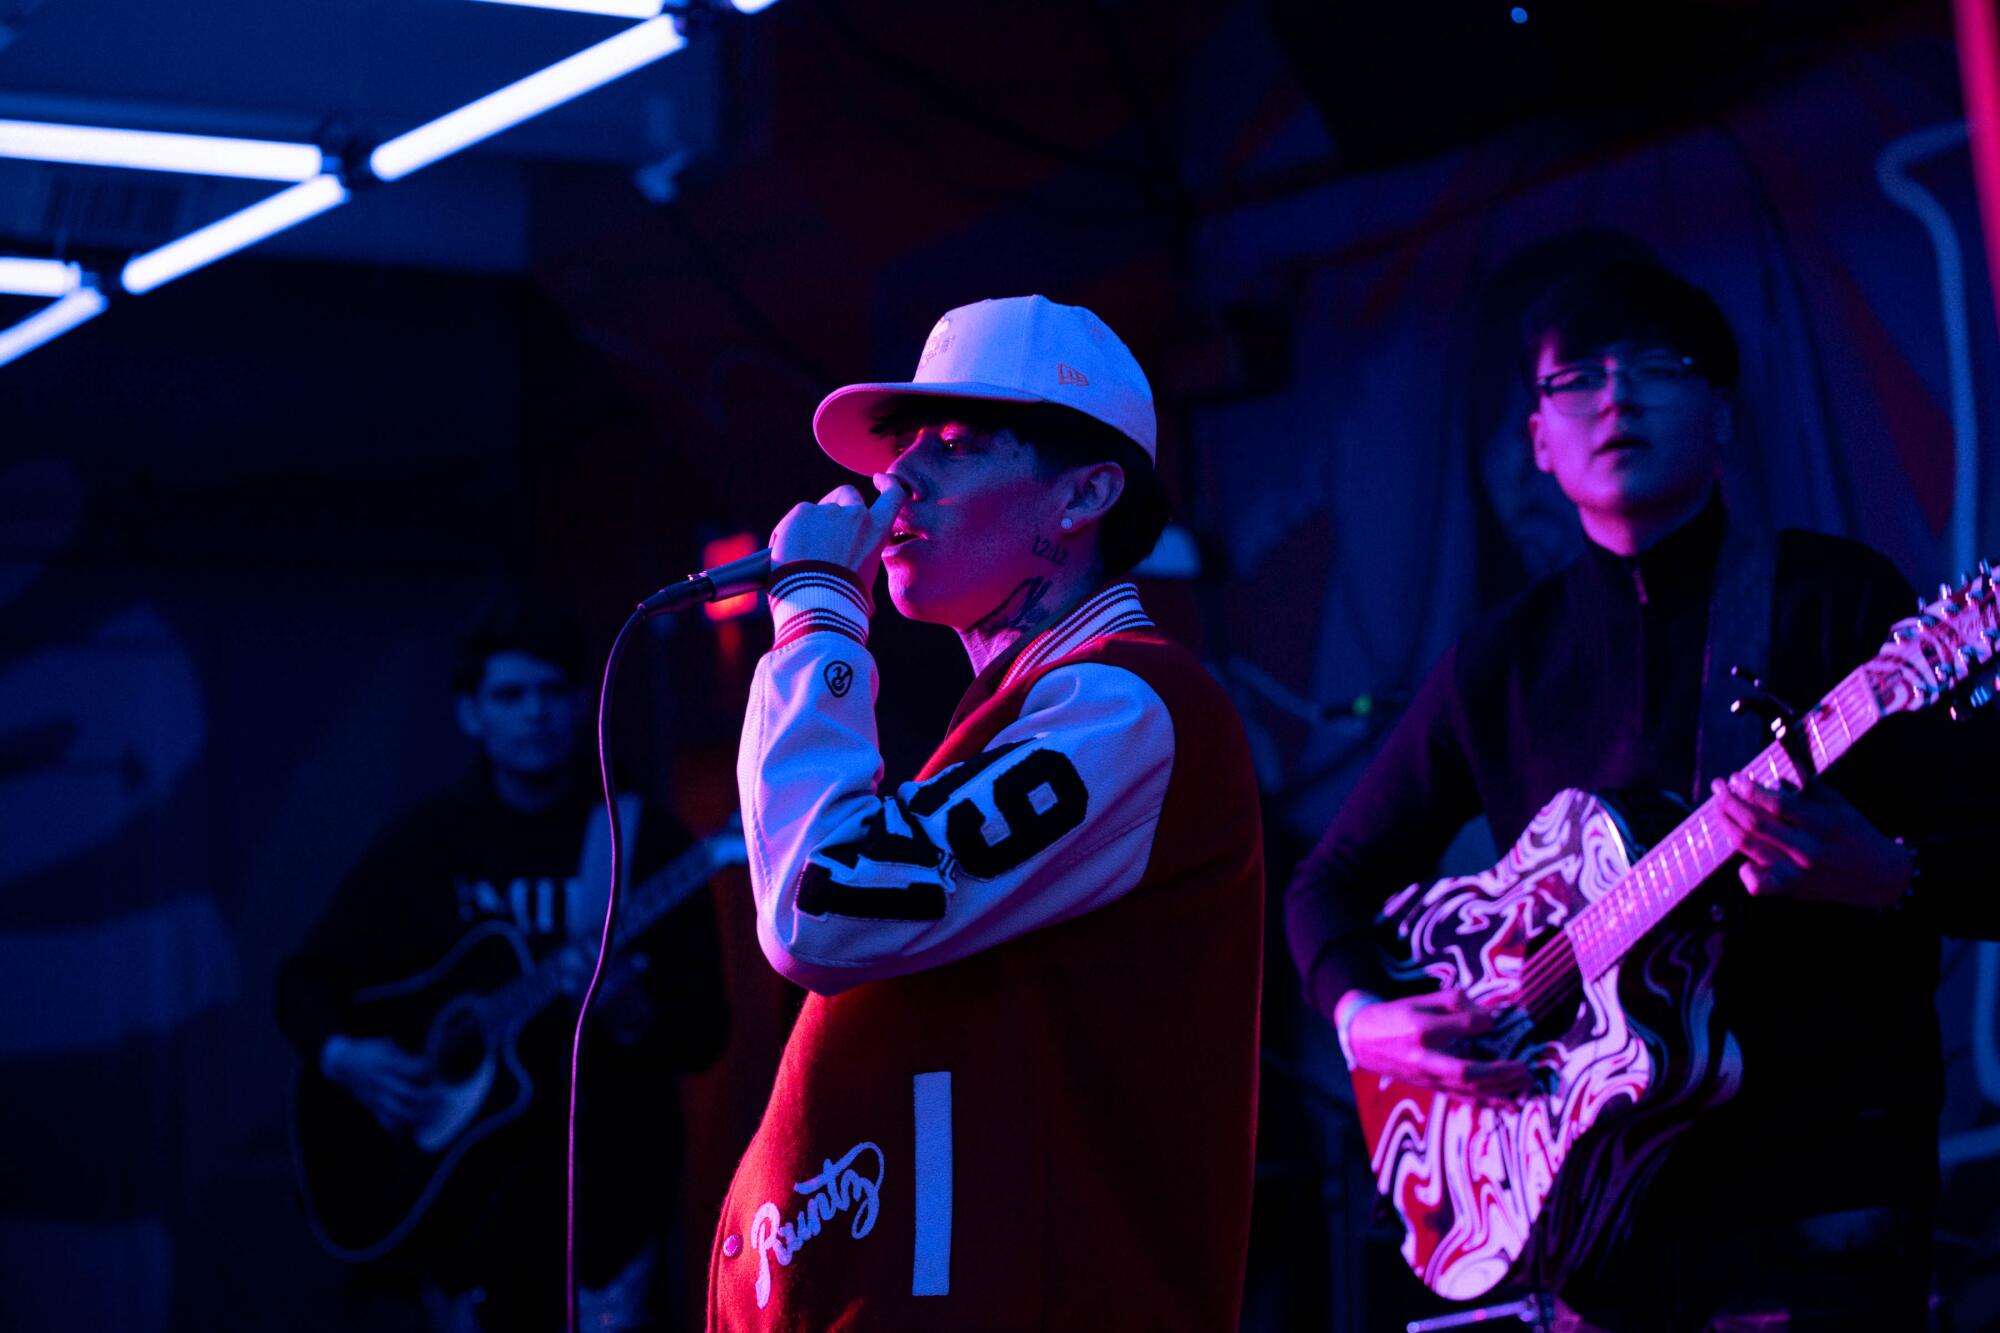 Polo Gonzalez closed out the night at the De Los showcase at SXSW on March 15.